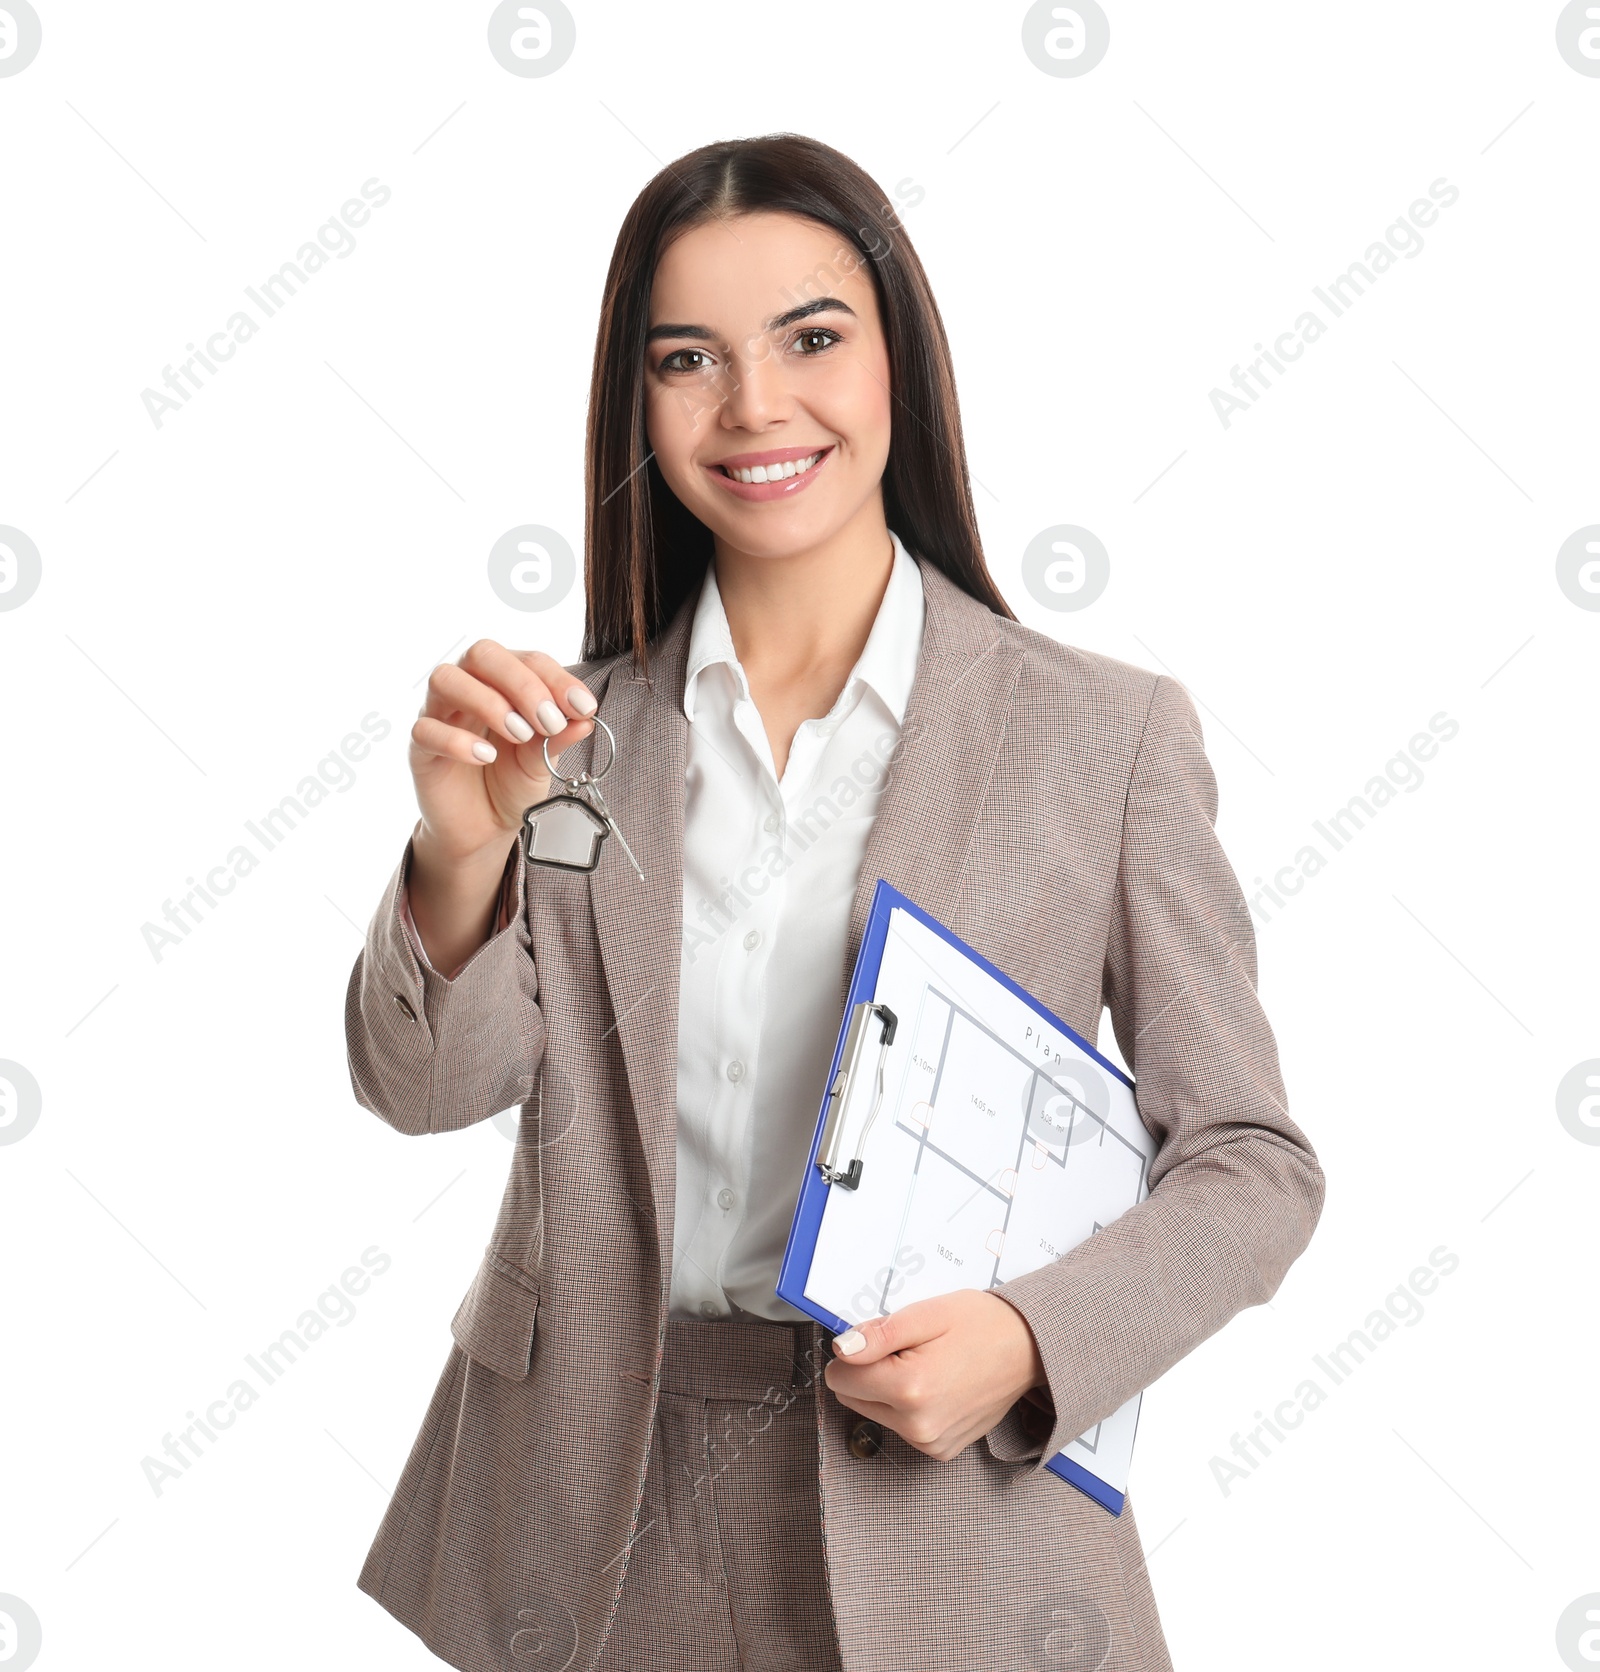 Photo of Real estate agent with key and clipboard on white background